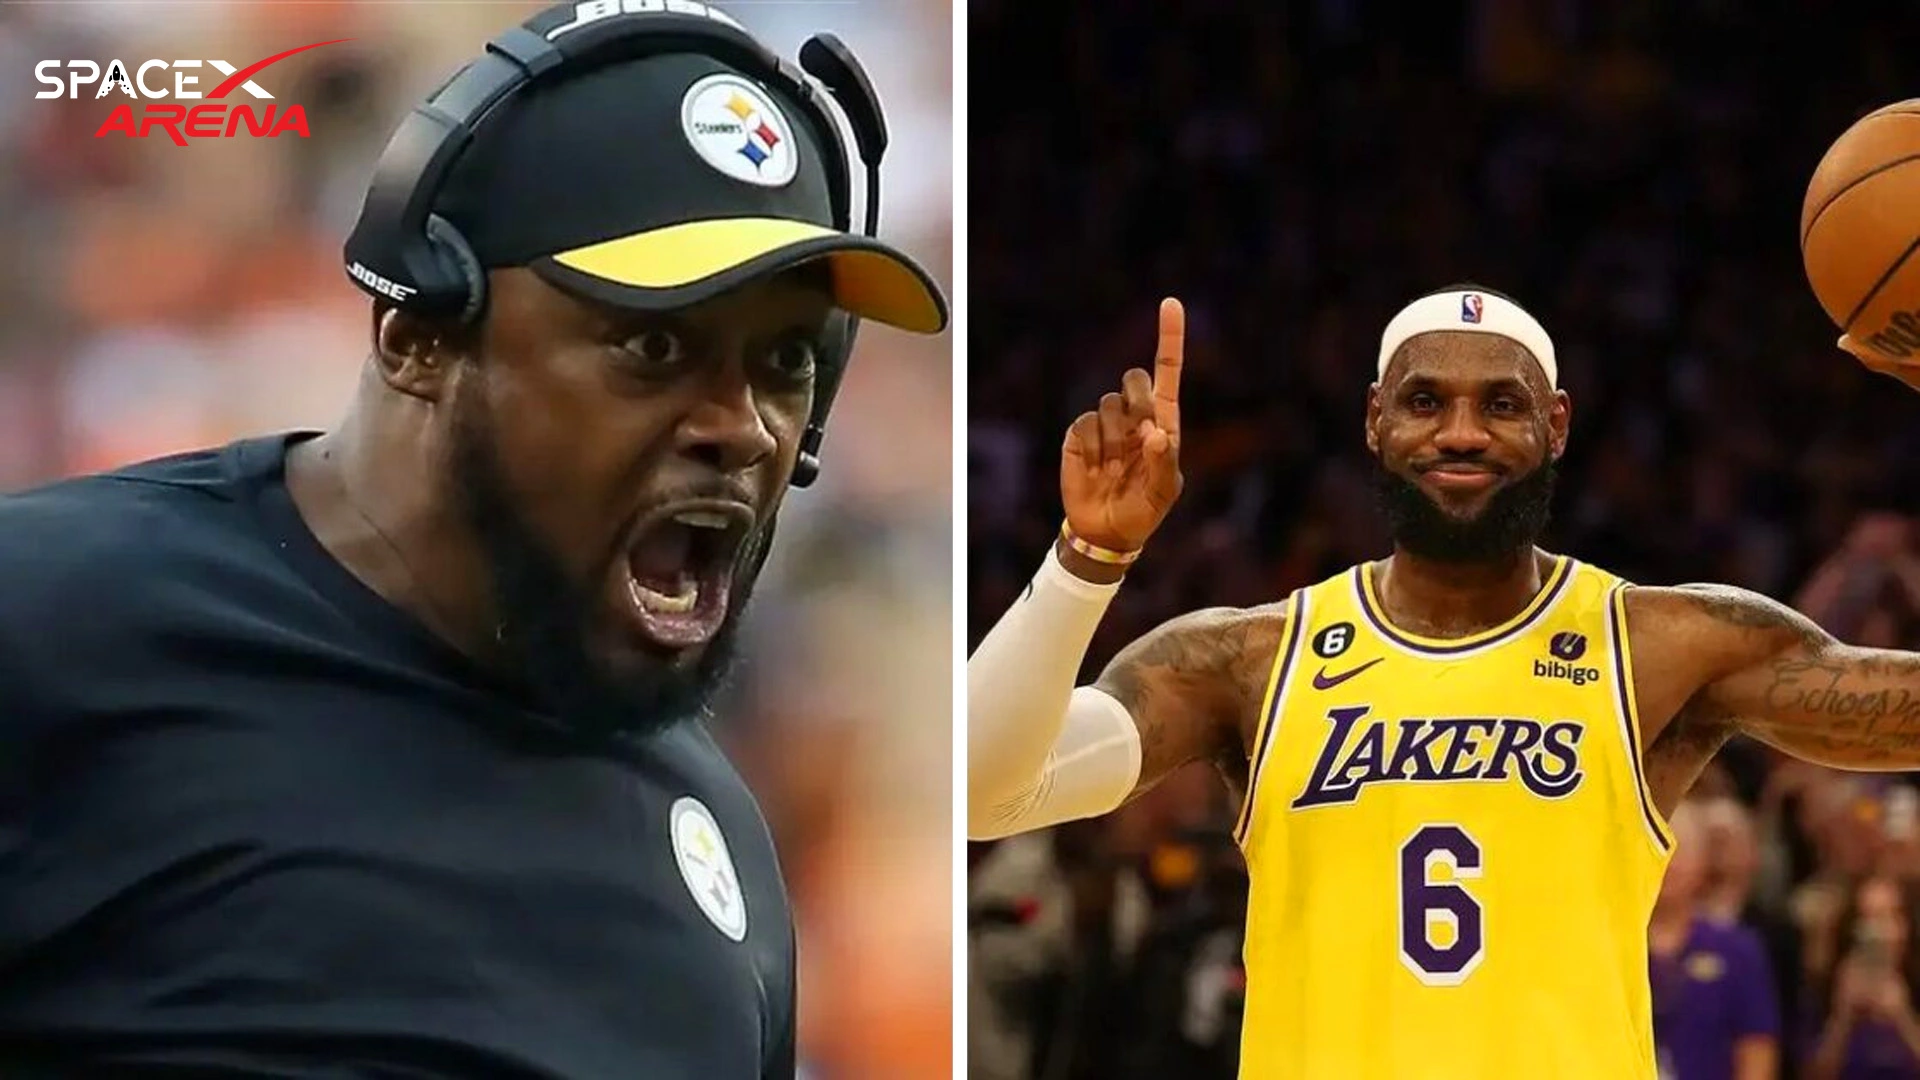 Mike Tomlin Teaches America-Hating James Lebron to “Go To China”